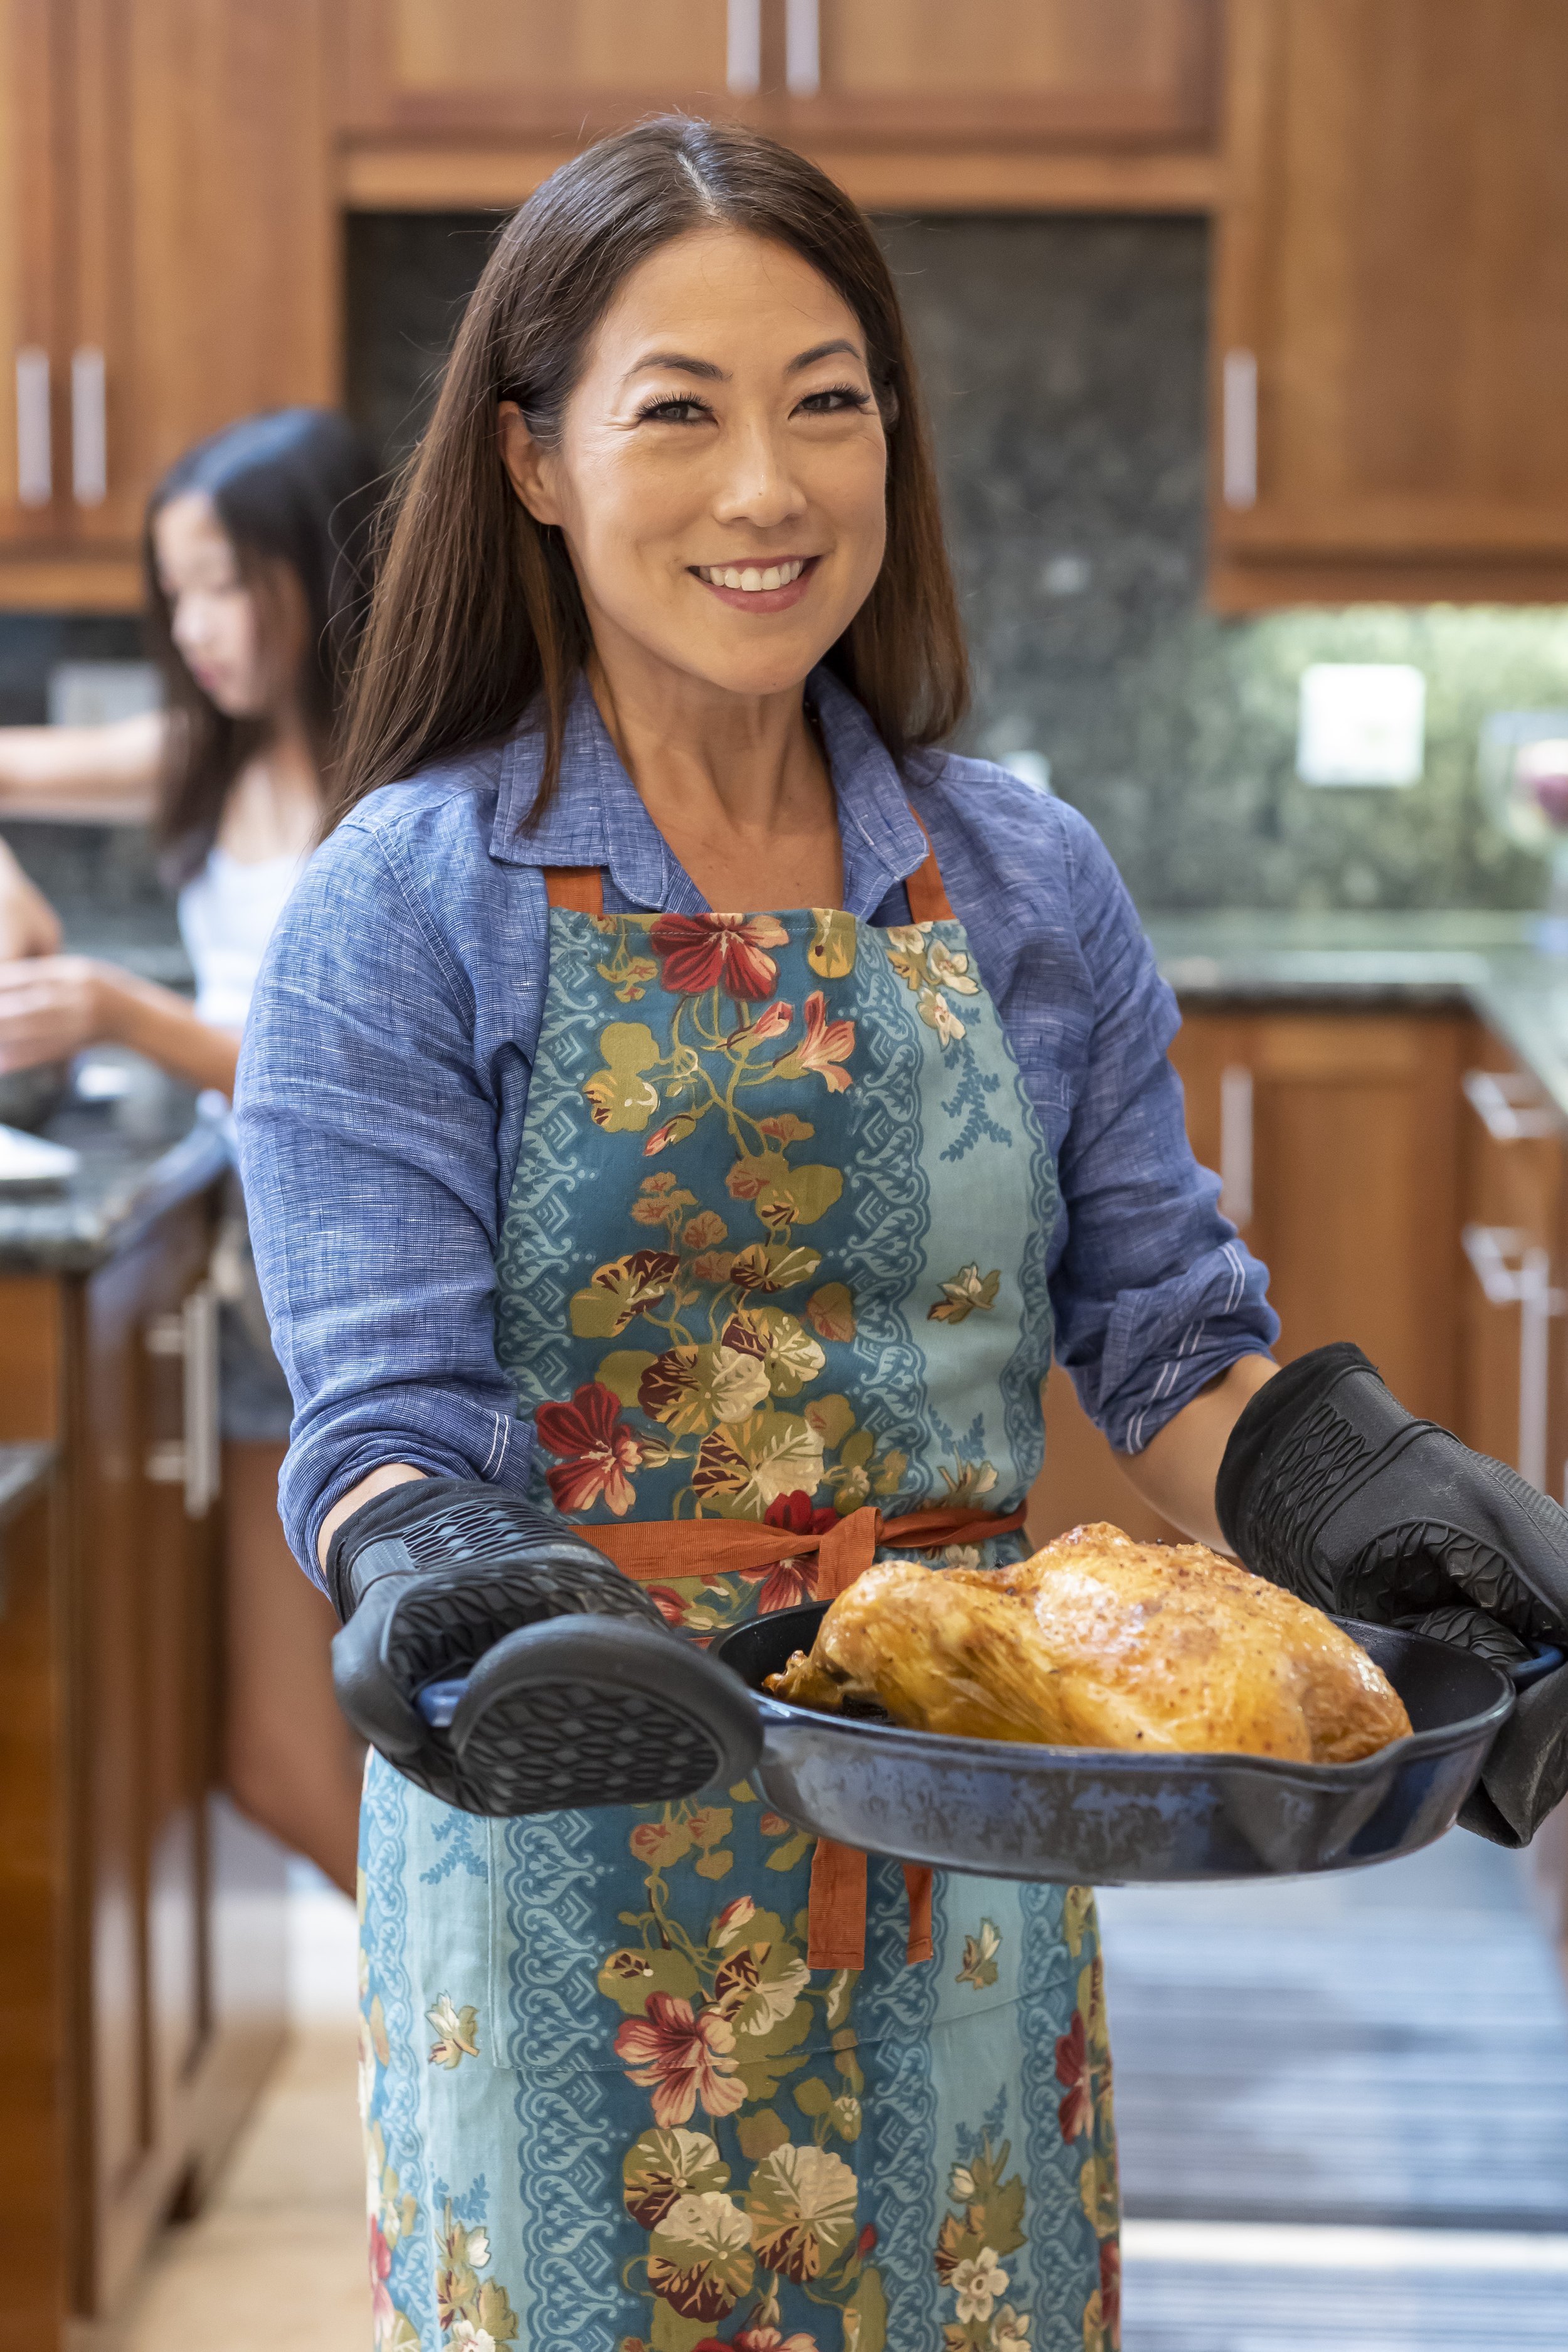  Michelle Ho and daughter Lia prepare their favorite recipes: Easy Roast Chicken and Brown Butter Chocolate Chip Cookies.  